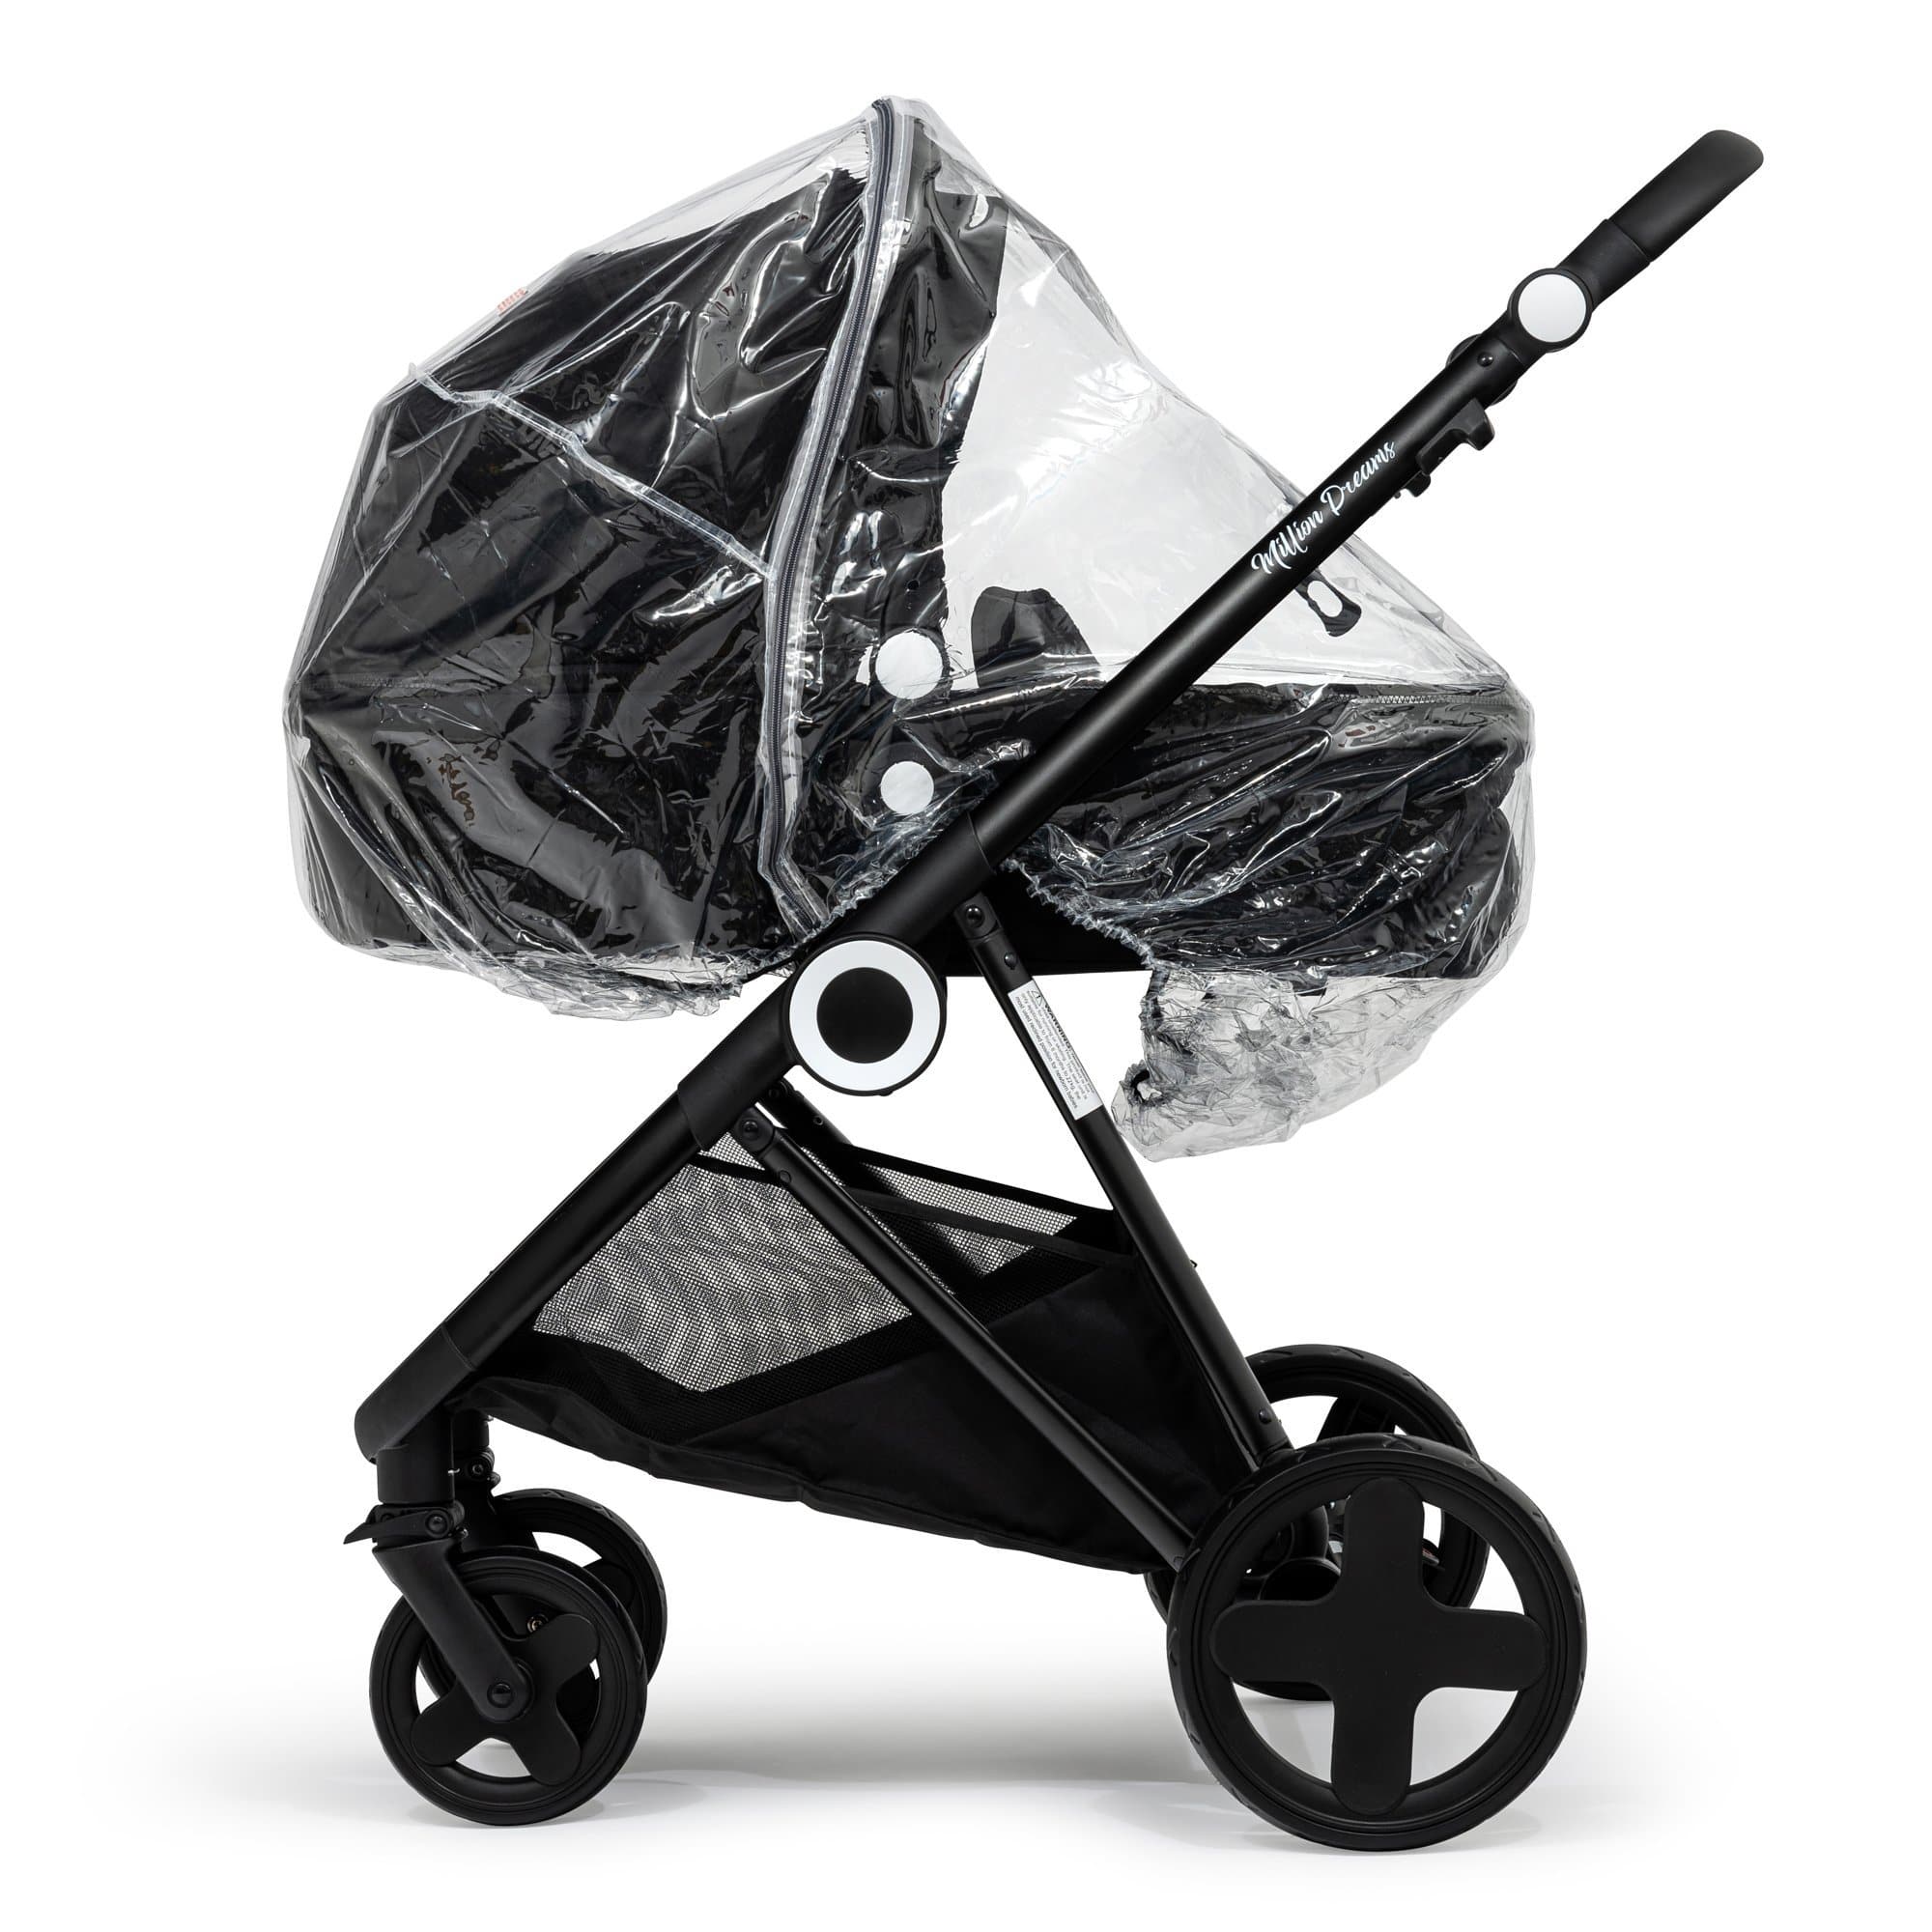 2 in 1 Rain Cover Compatible with Phil & Teds - Fits All Models - For Your Little One